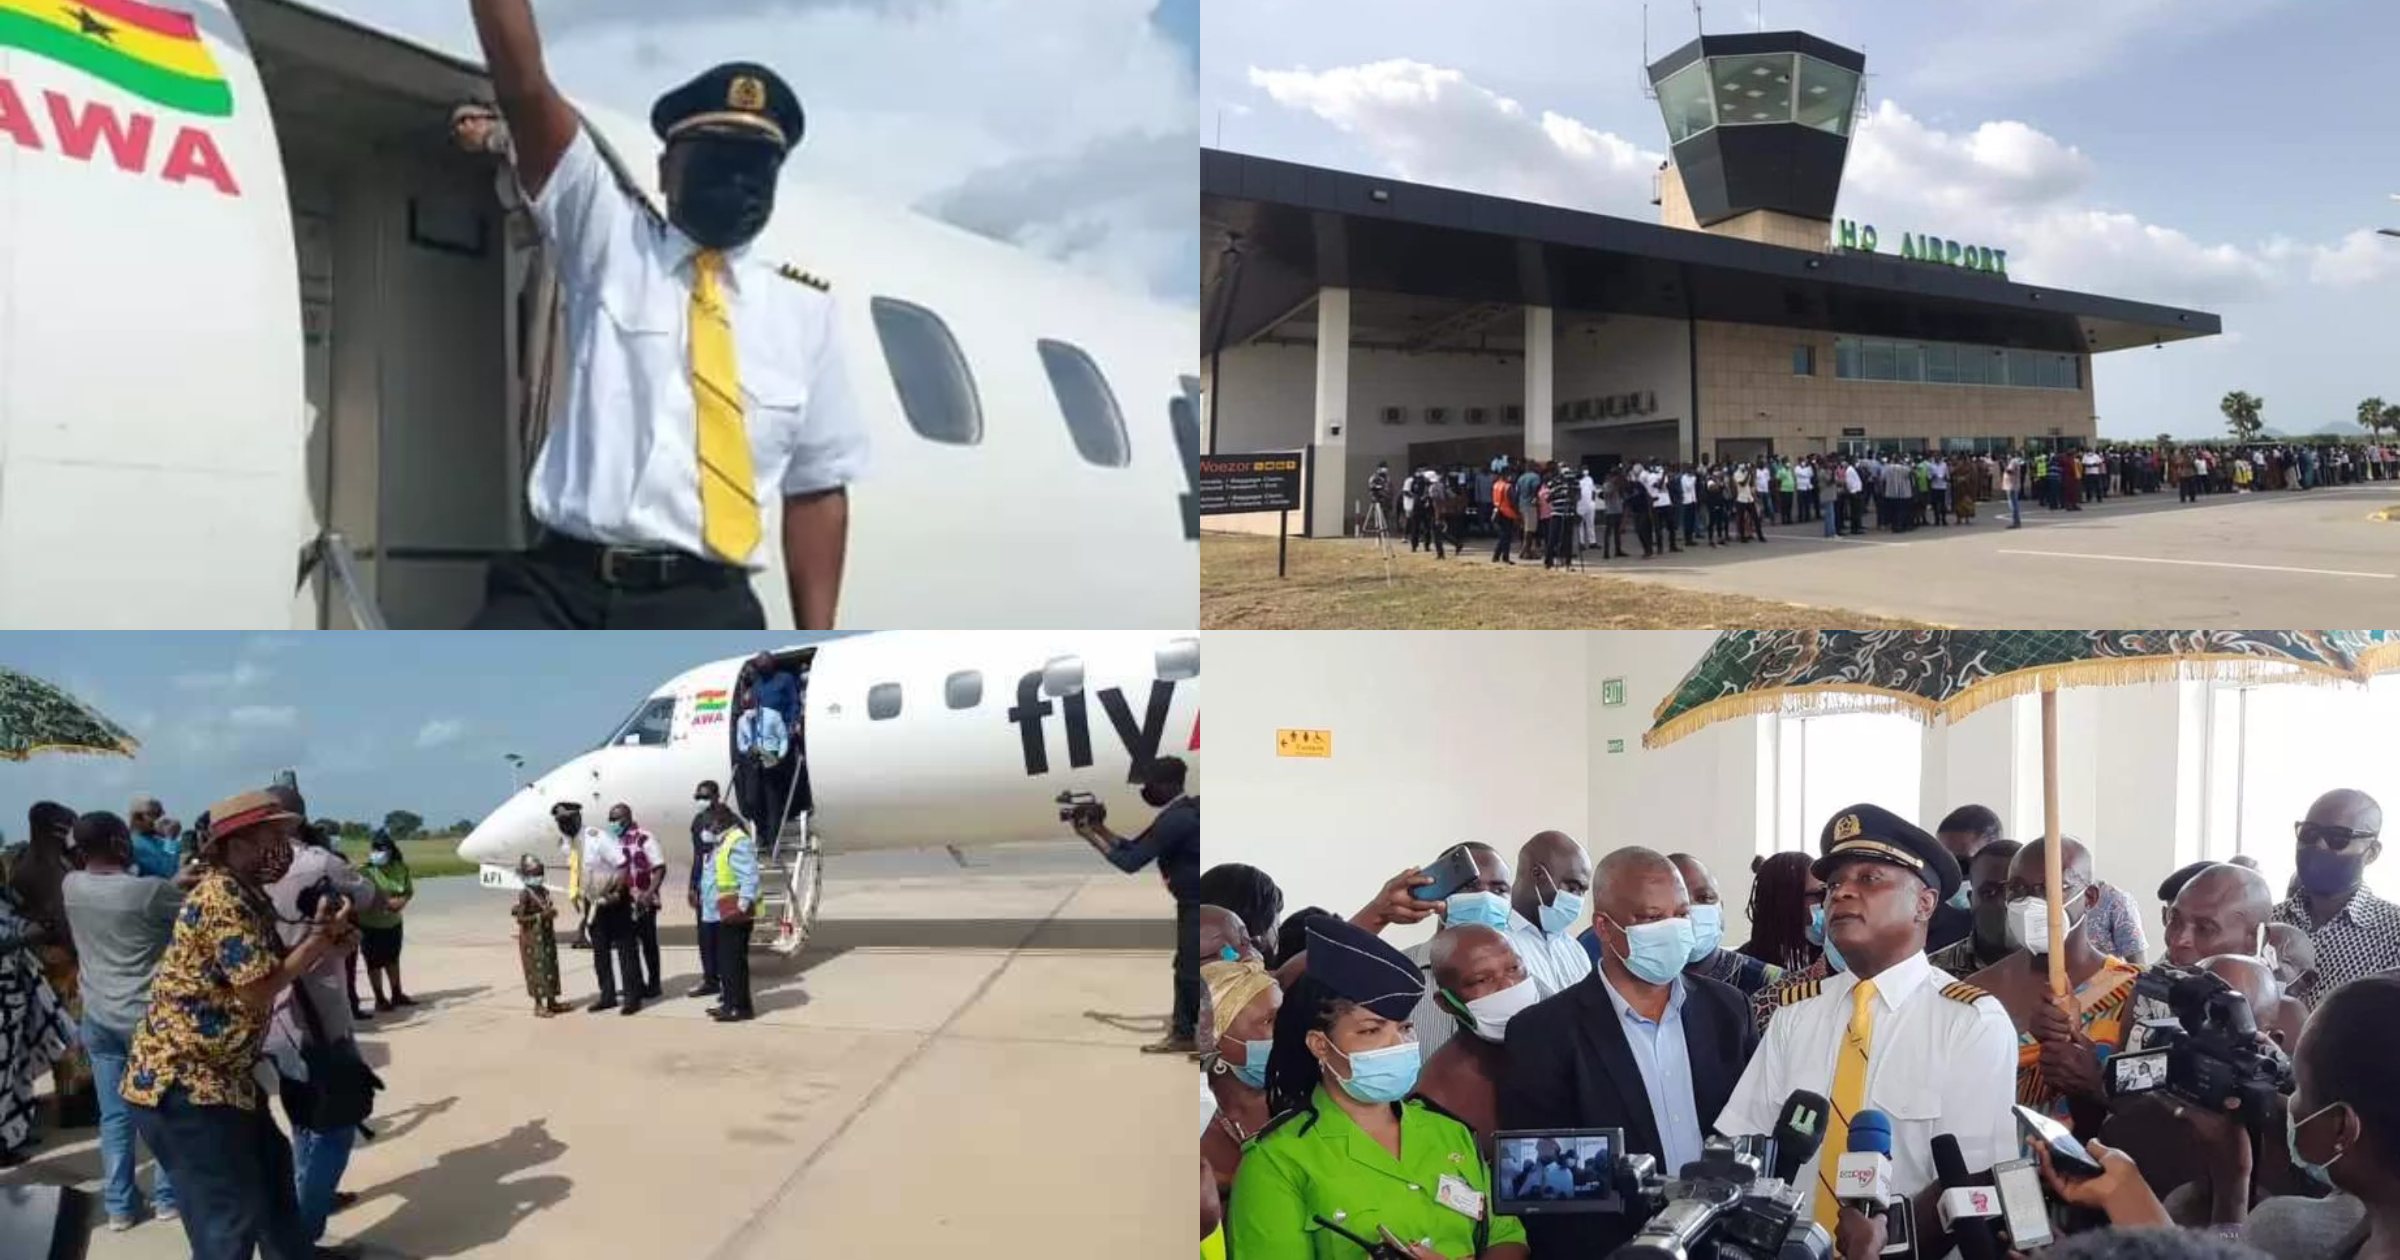 Ho Airport: Photo And Video Drop As 1st Plane Flies To Volta Regional Capital